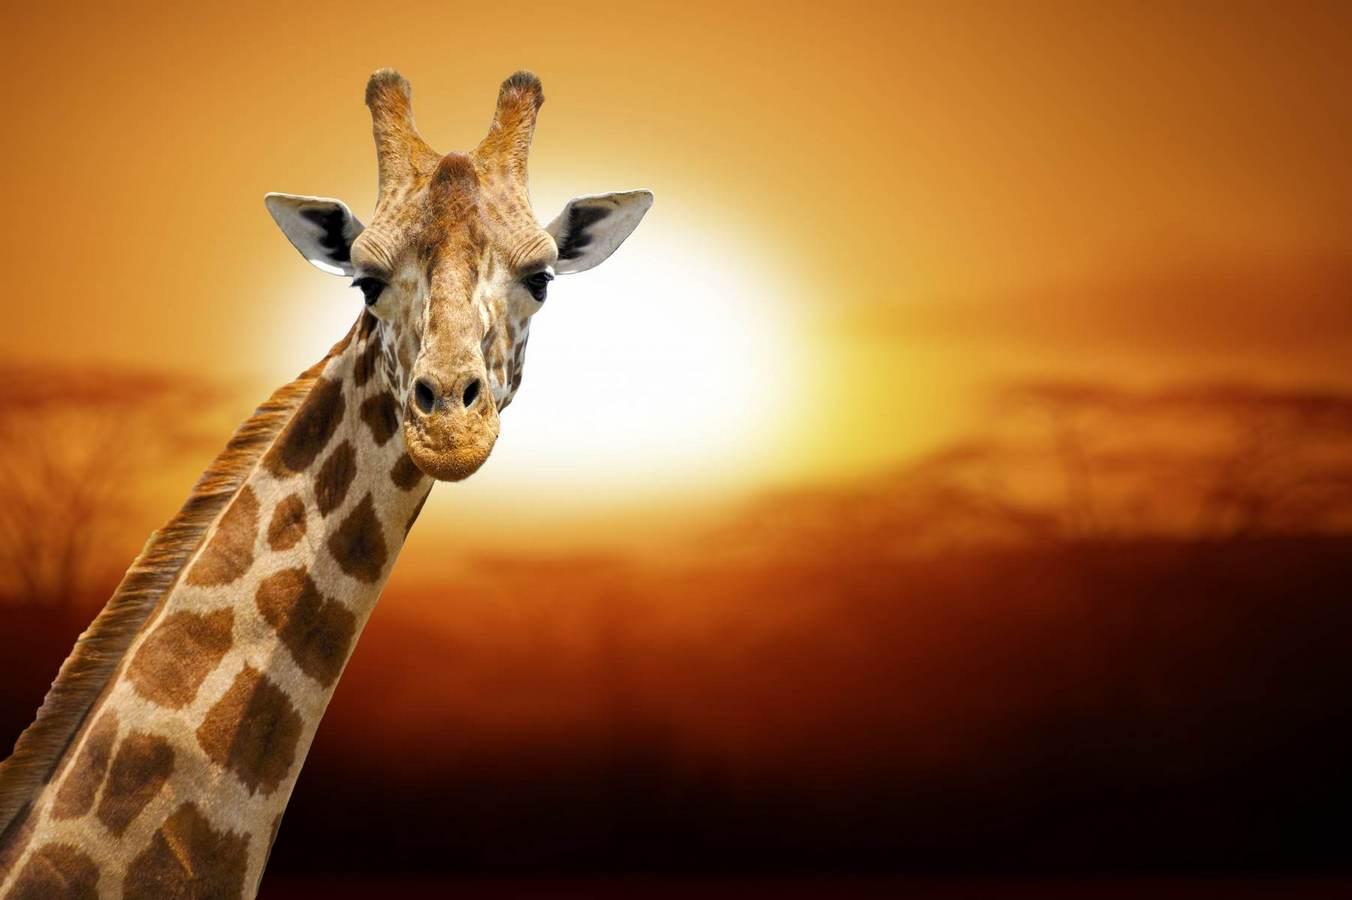 Wallpapers Giraffe against the backgrounds of a sunset